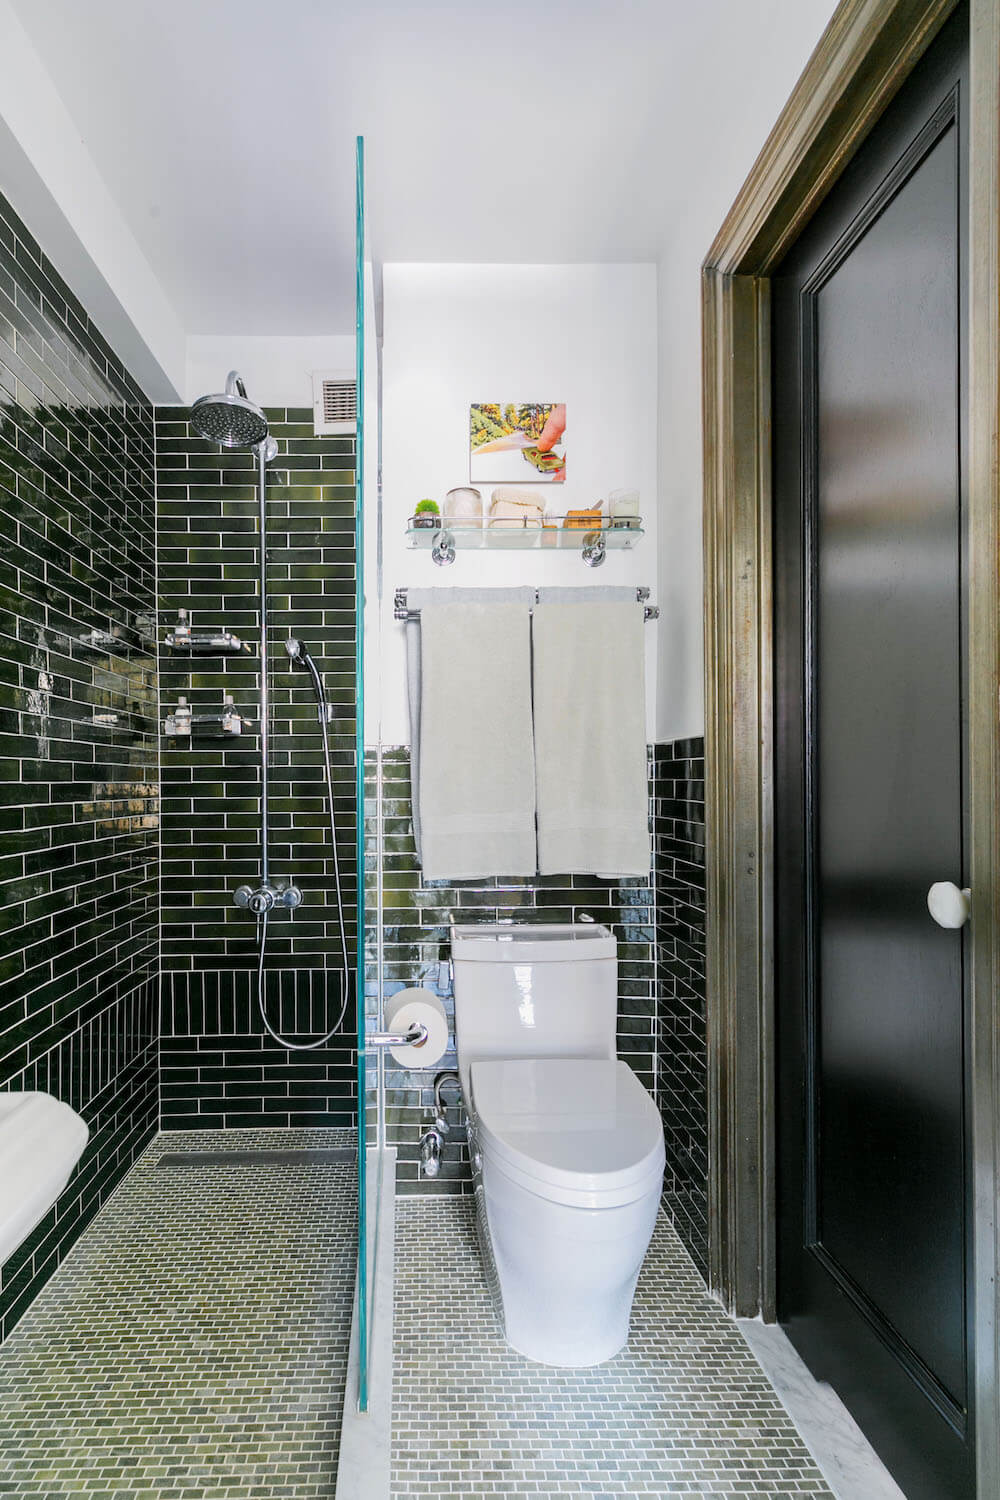 Image of a toilet in green tiled bathroom